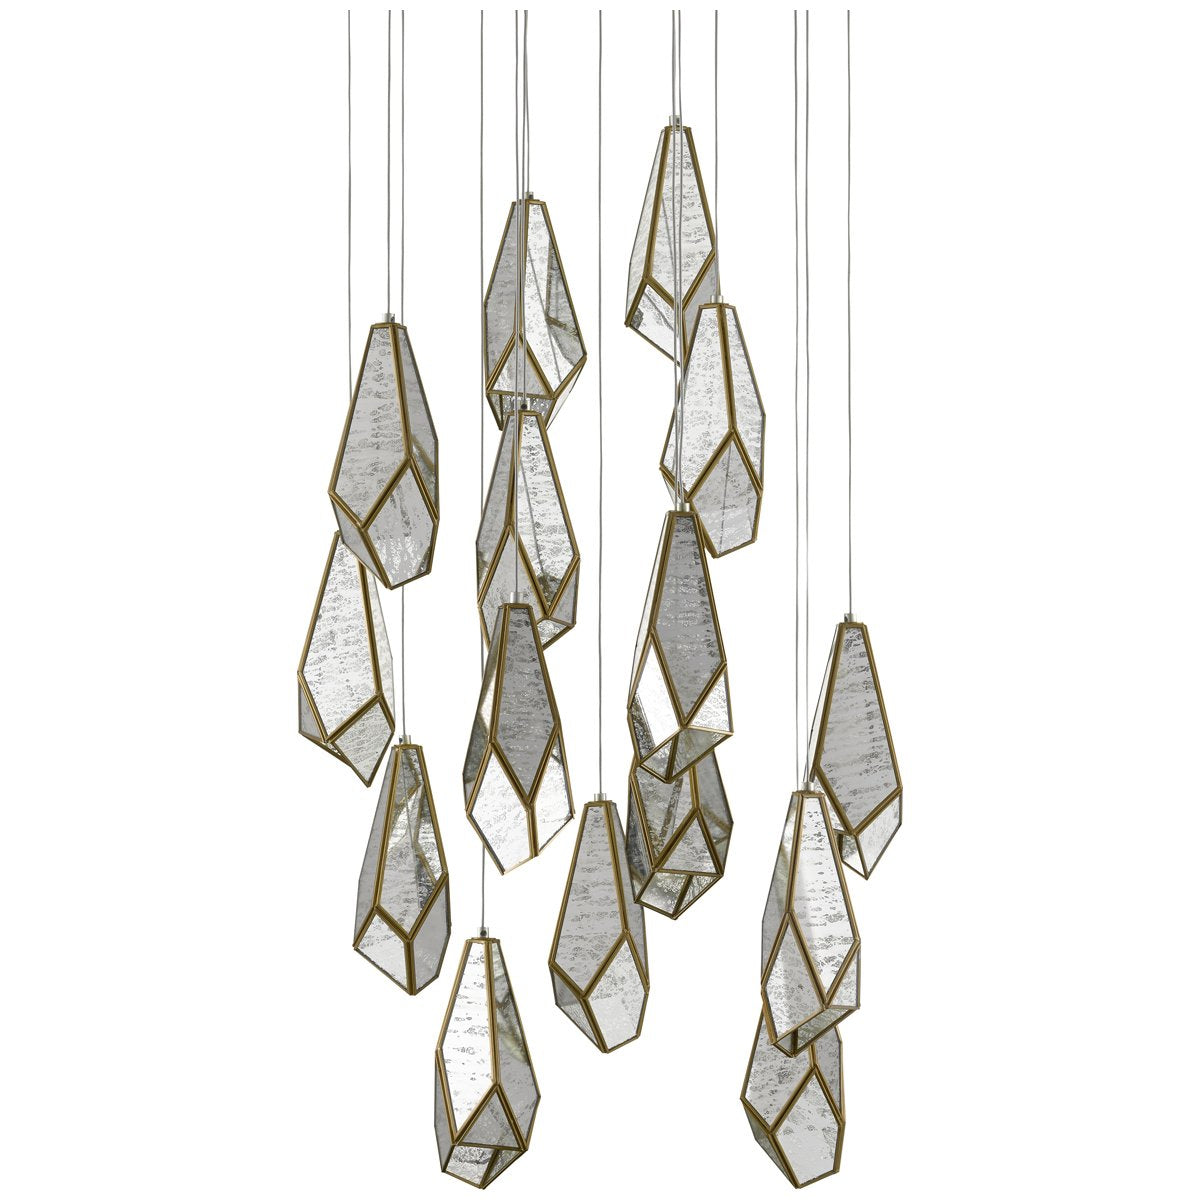 Currey and Company Glace Round 15-Light Multi-Drop Pendant